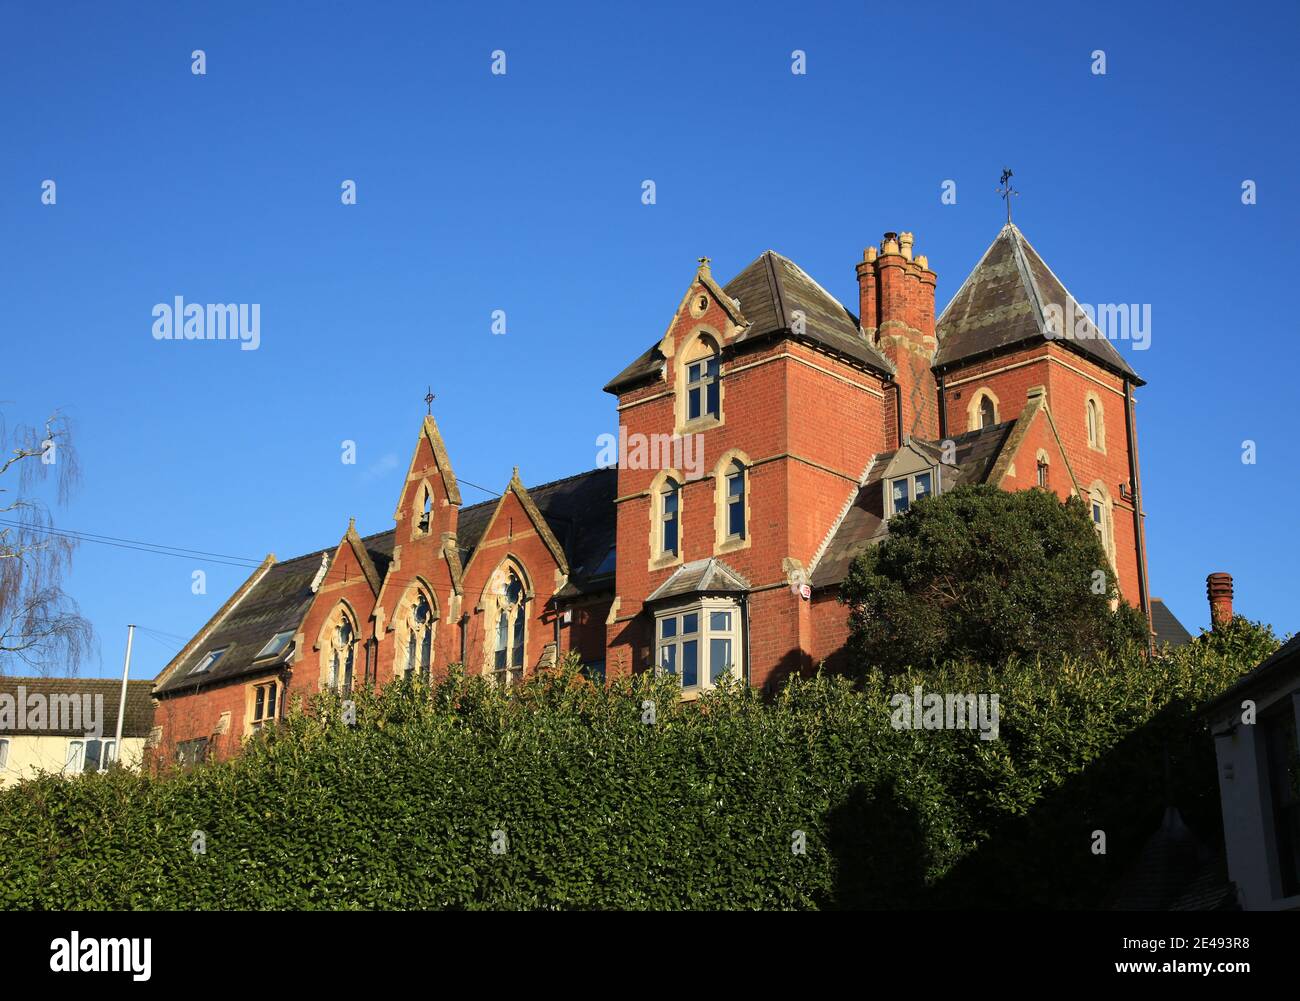 Old Foley school, a large gothic style building in Kinver, Staffordshire, England, UK. Stock Photo